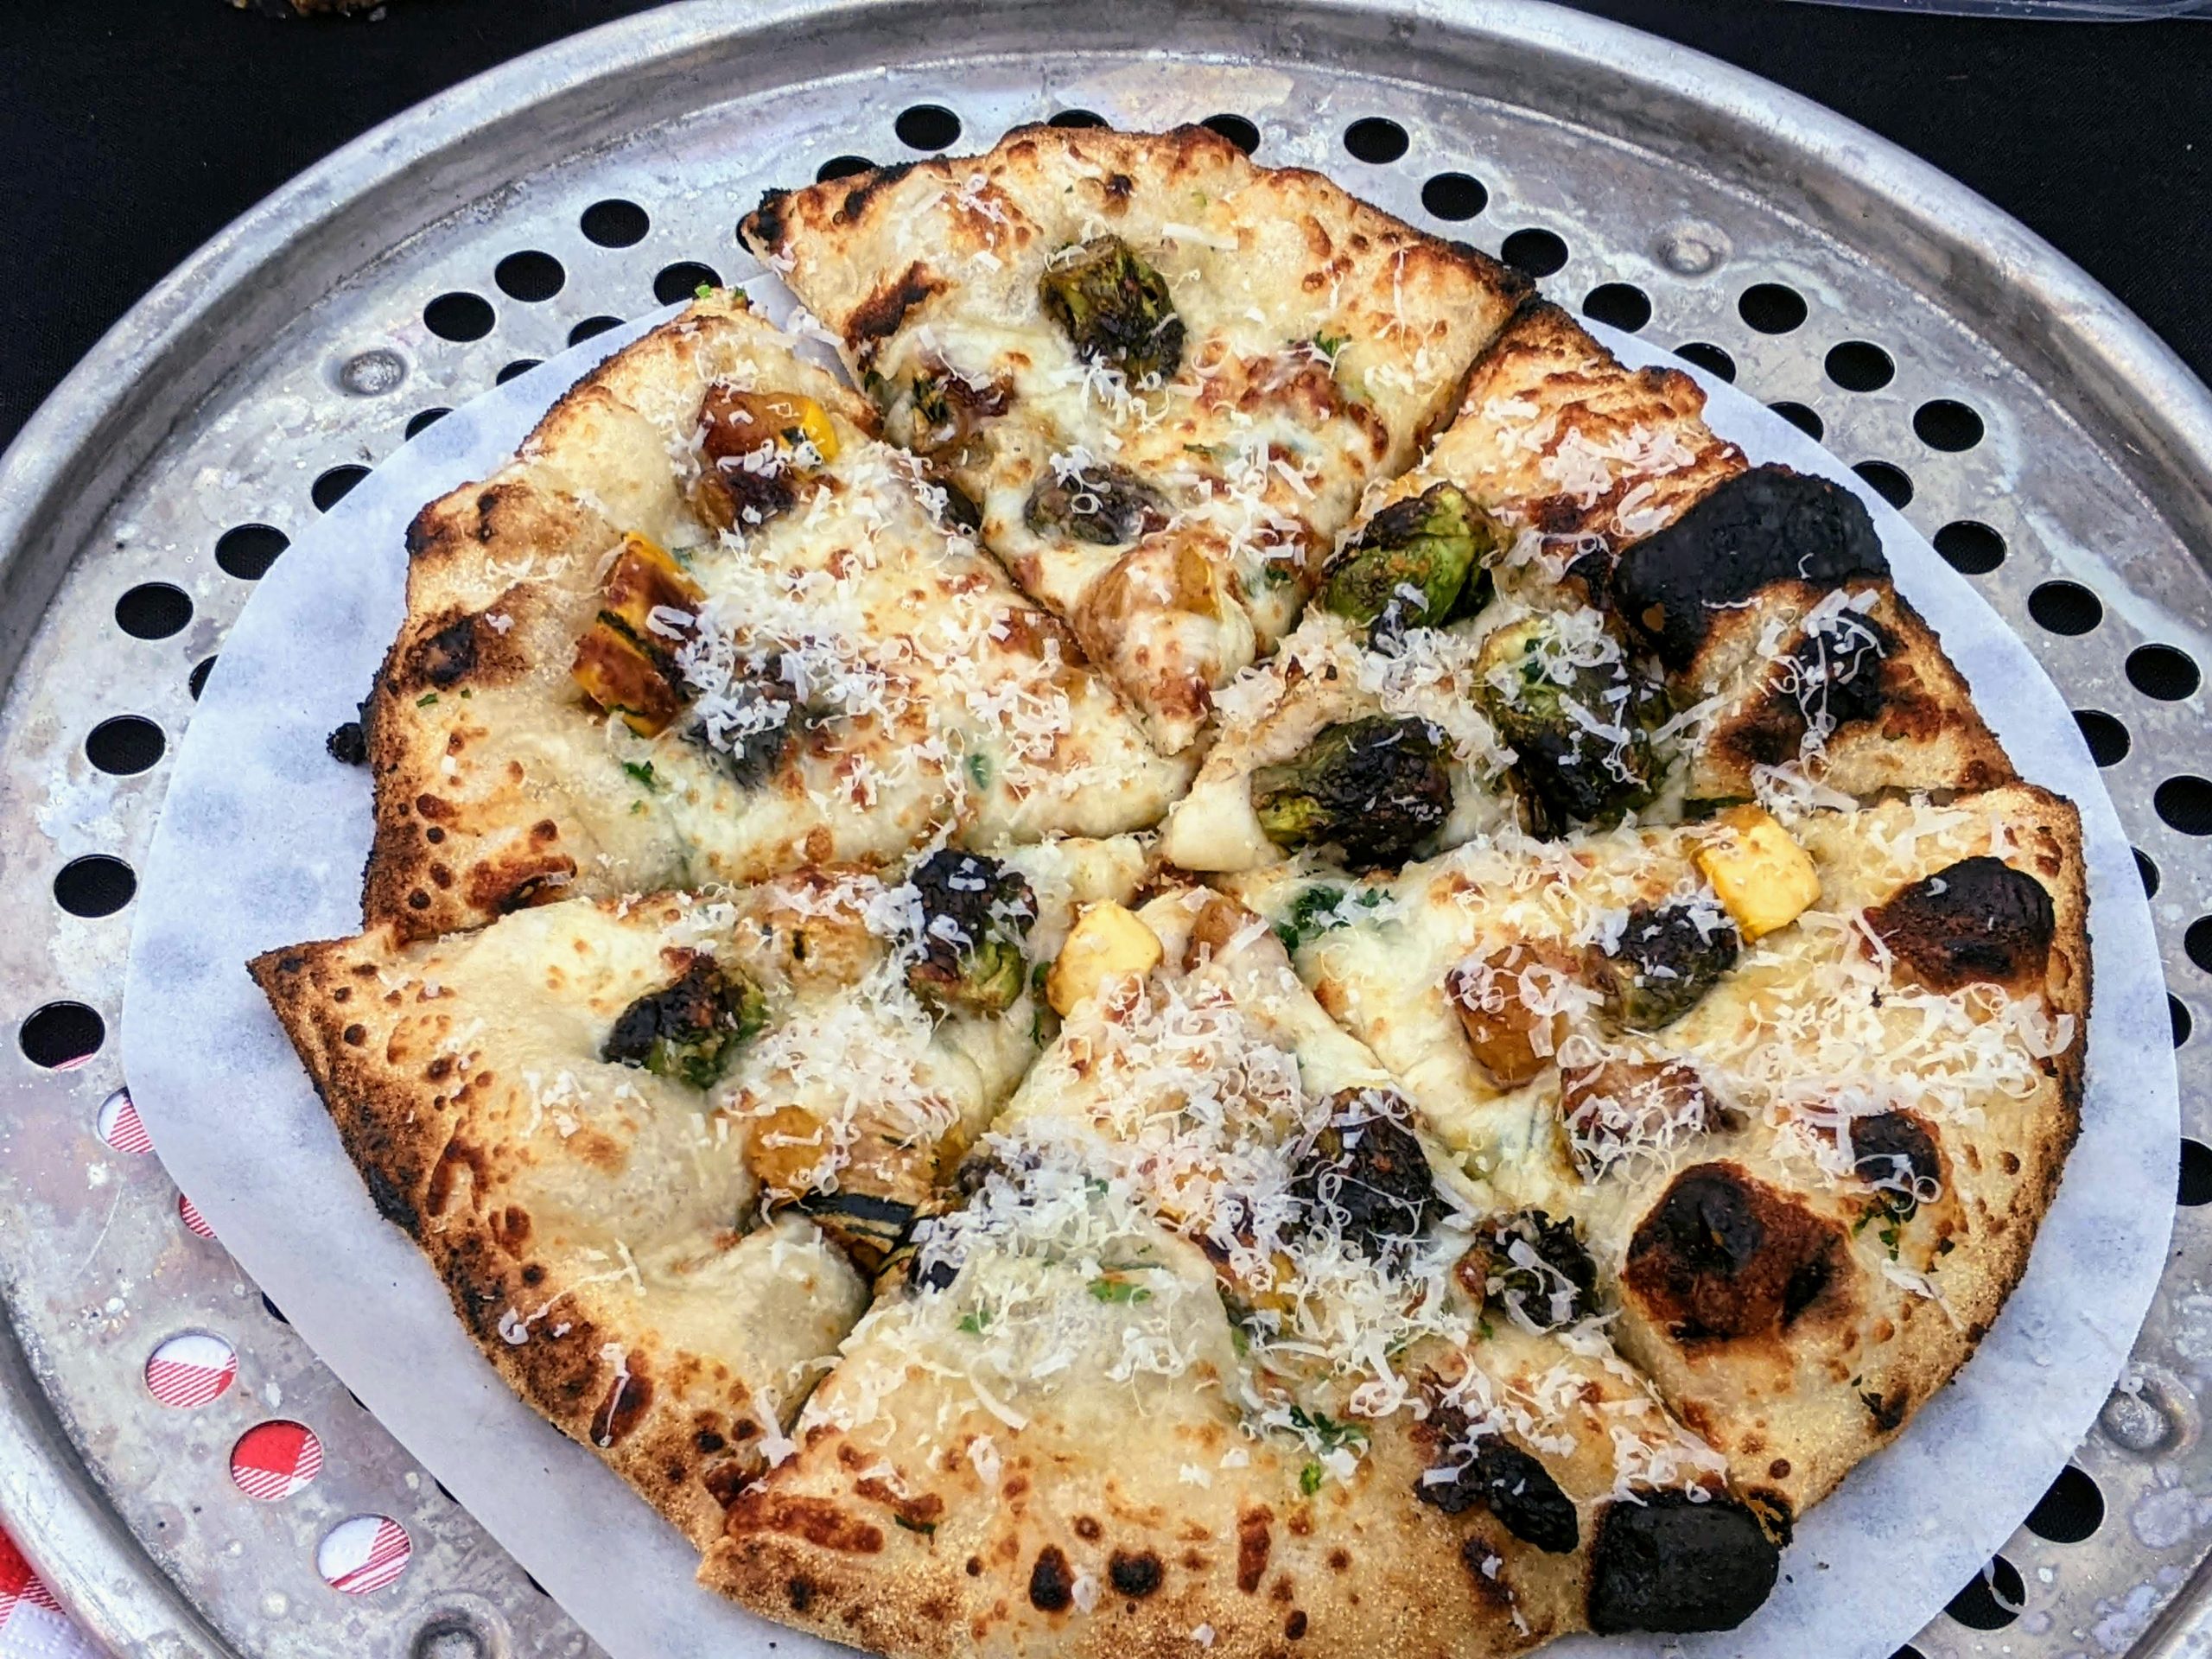 Cheese pizza by Crafted Food Services at the Plant Life Pizza Picnic outside of Des Moines